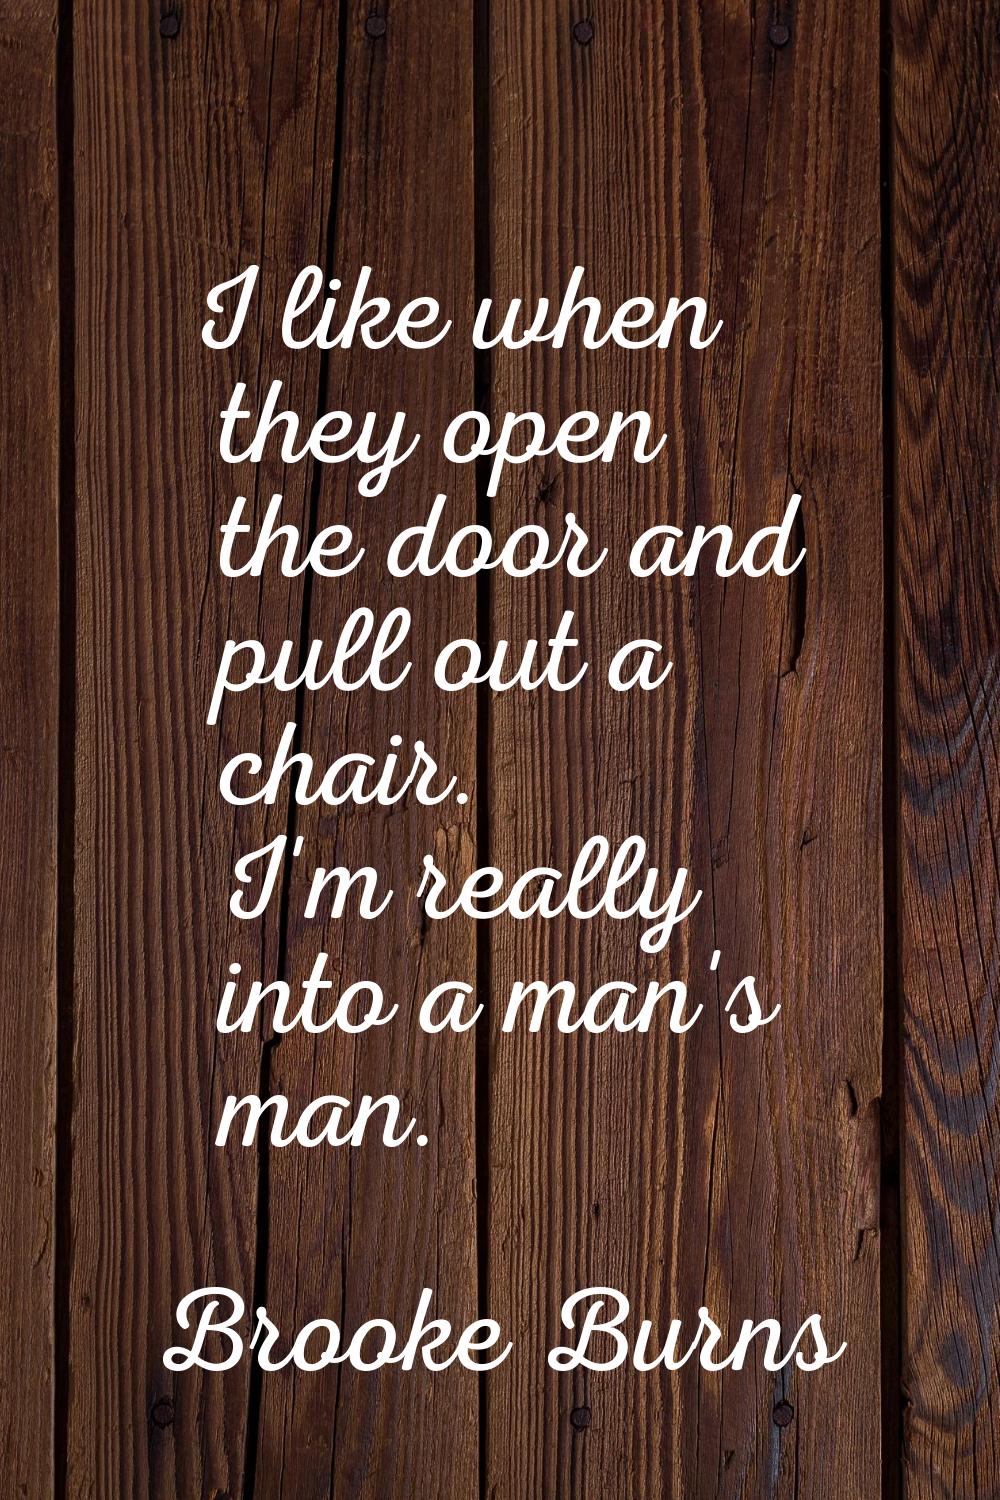 I like when they open the door and pull out a chair. I'm really into a man's man.